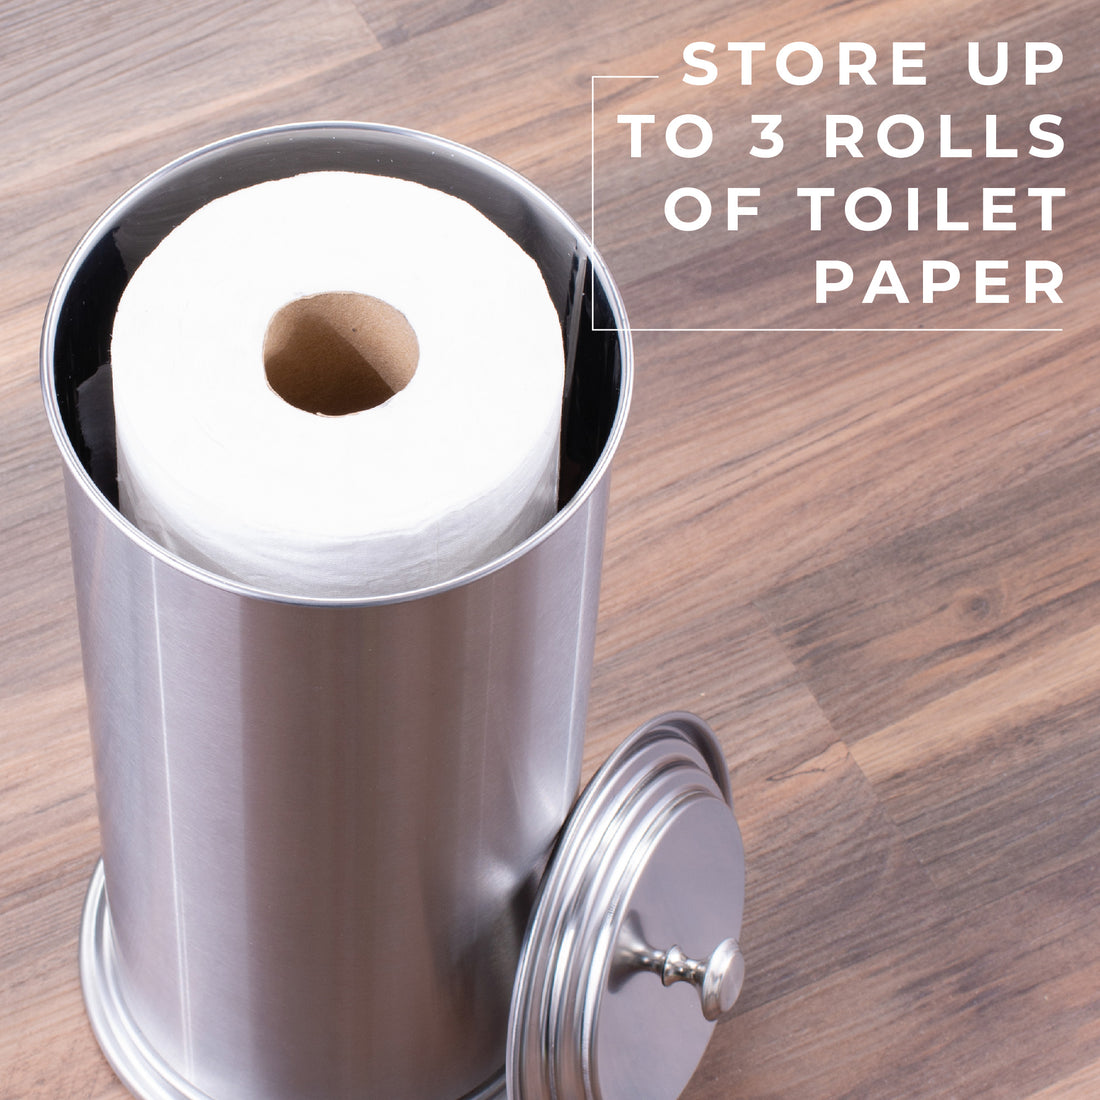 Topsky Toilet Paper Roll Holder Stand Extra Toilet Paper Holder Storage for  3